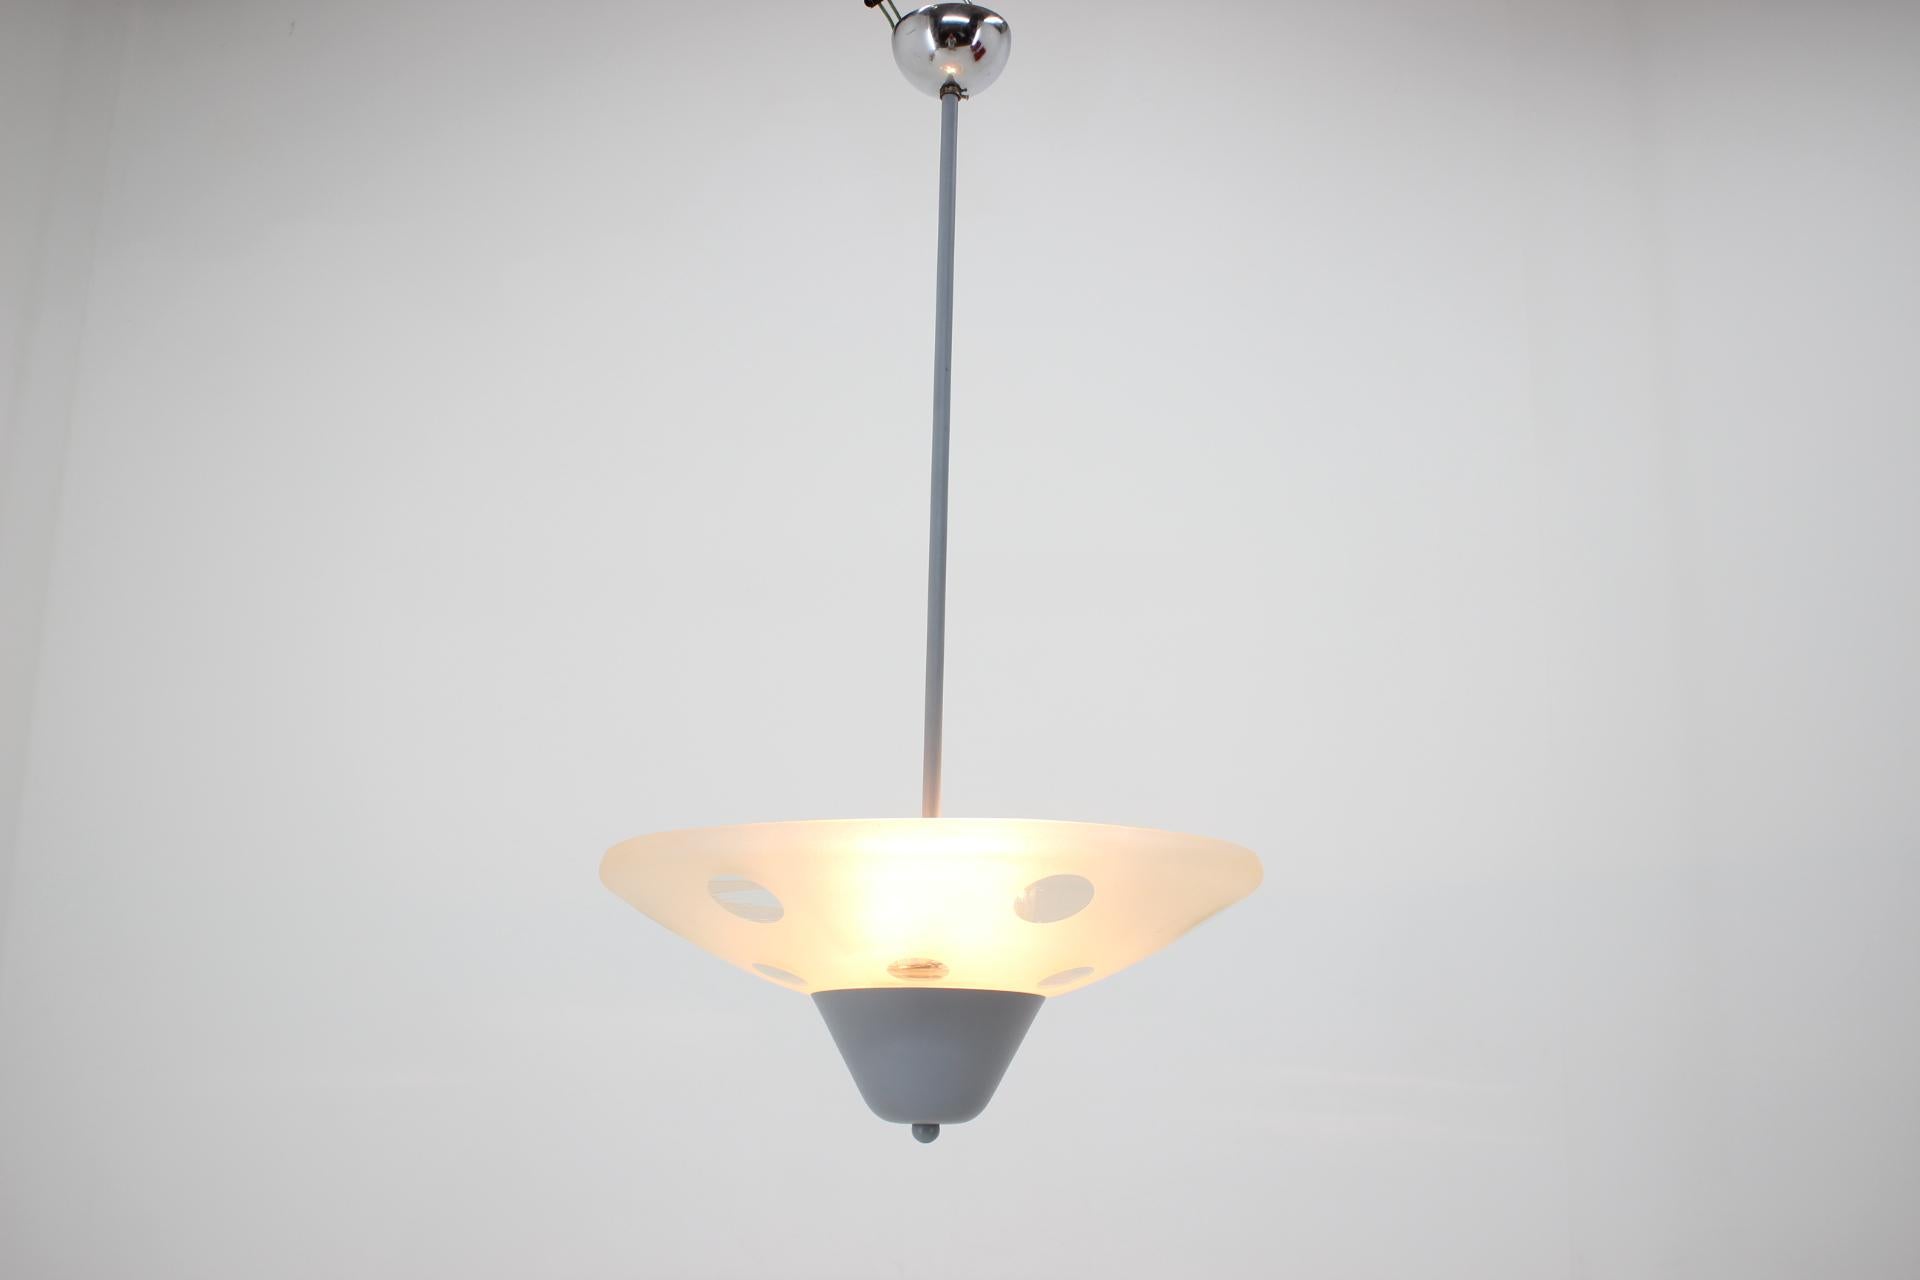 Rare Bauhaus Chandelier by Franta Anyz for Napako, 1940s In Good Condition For Sale In Praha, CZ